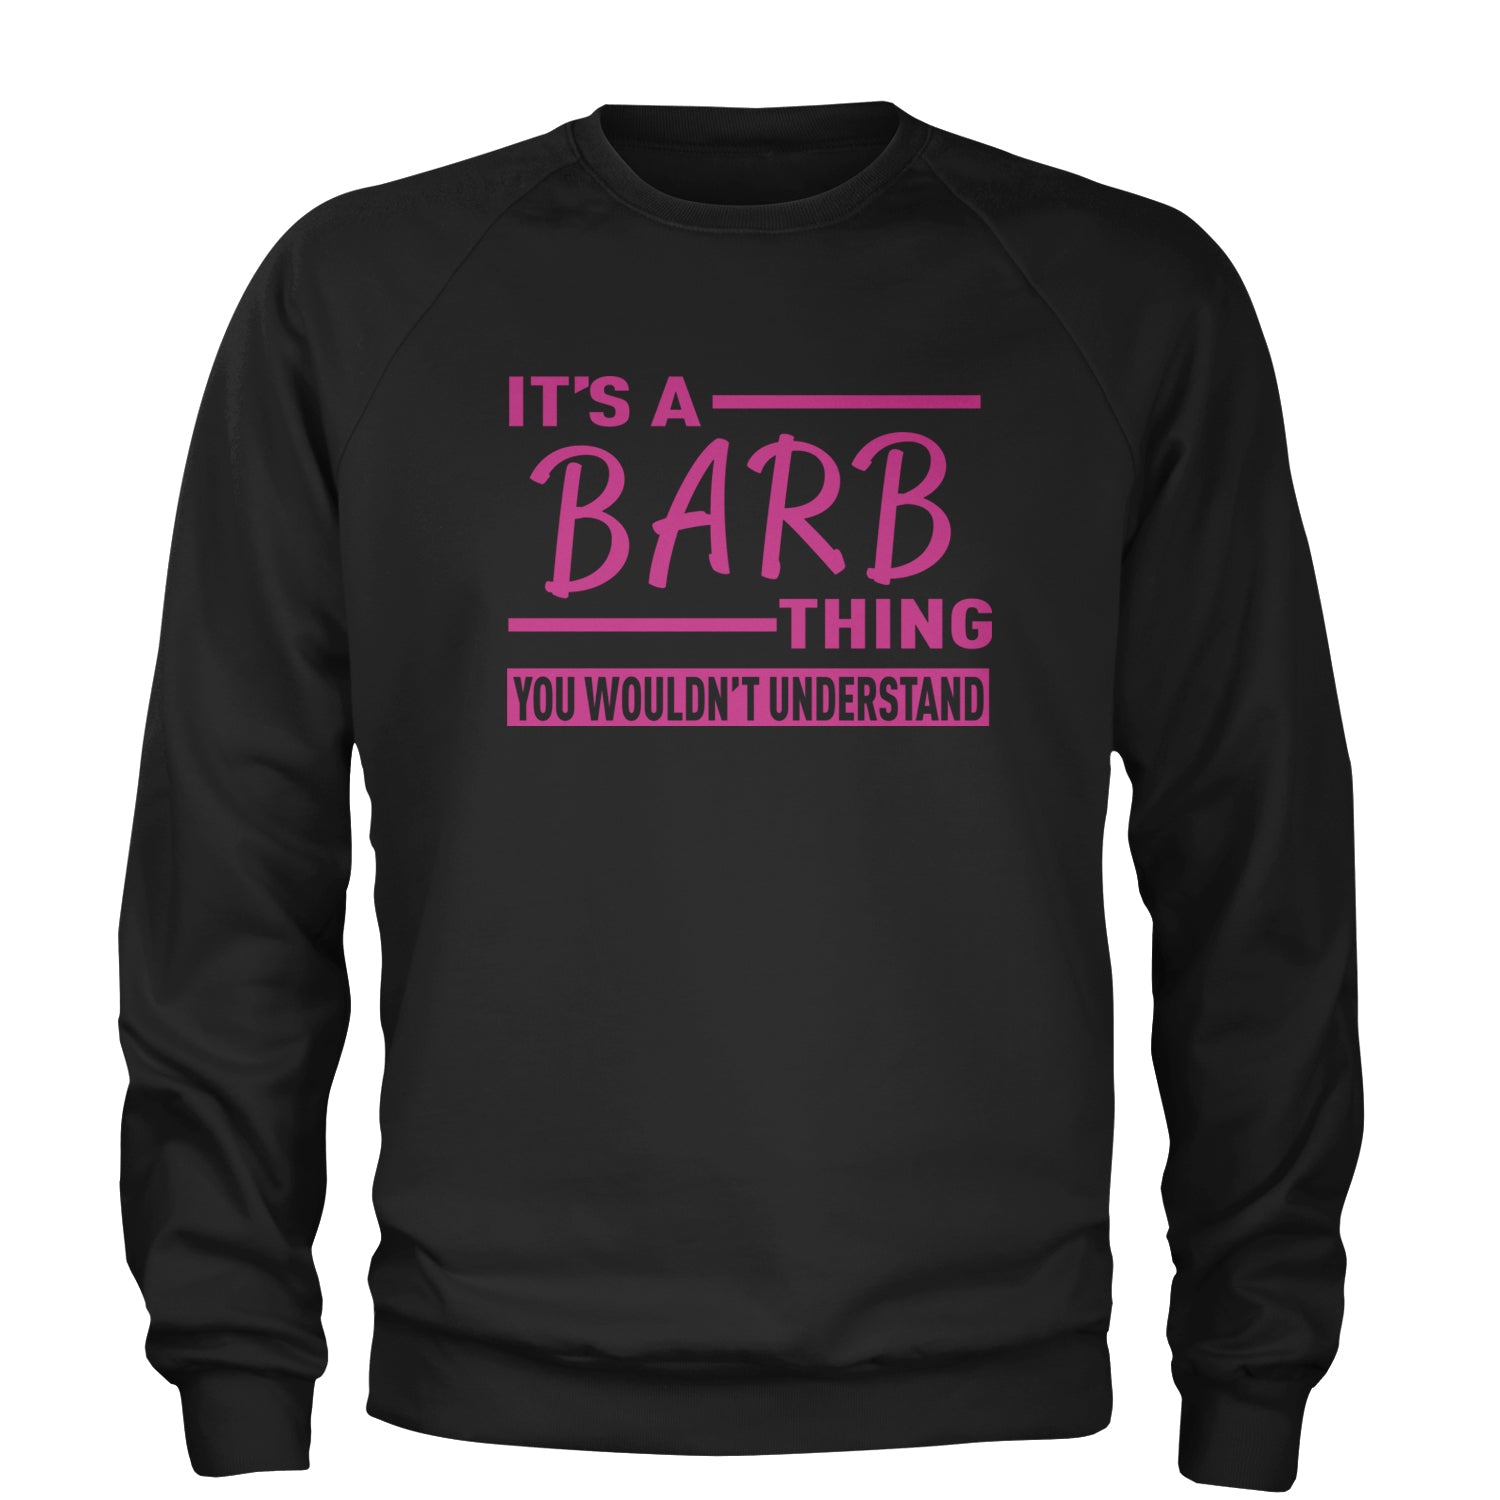 It's A Barb Thing, You Wouldn't Understand Adult Crewneck Sweatshirt